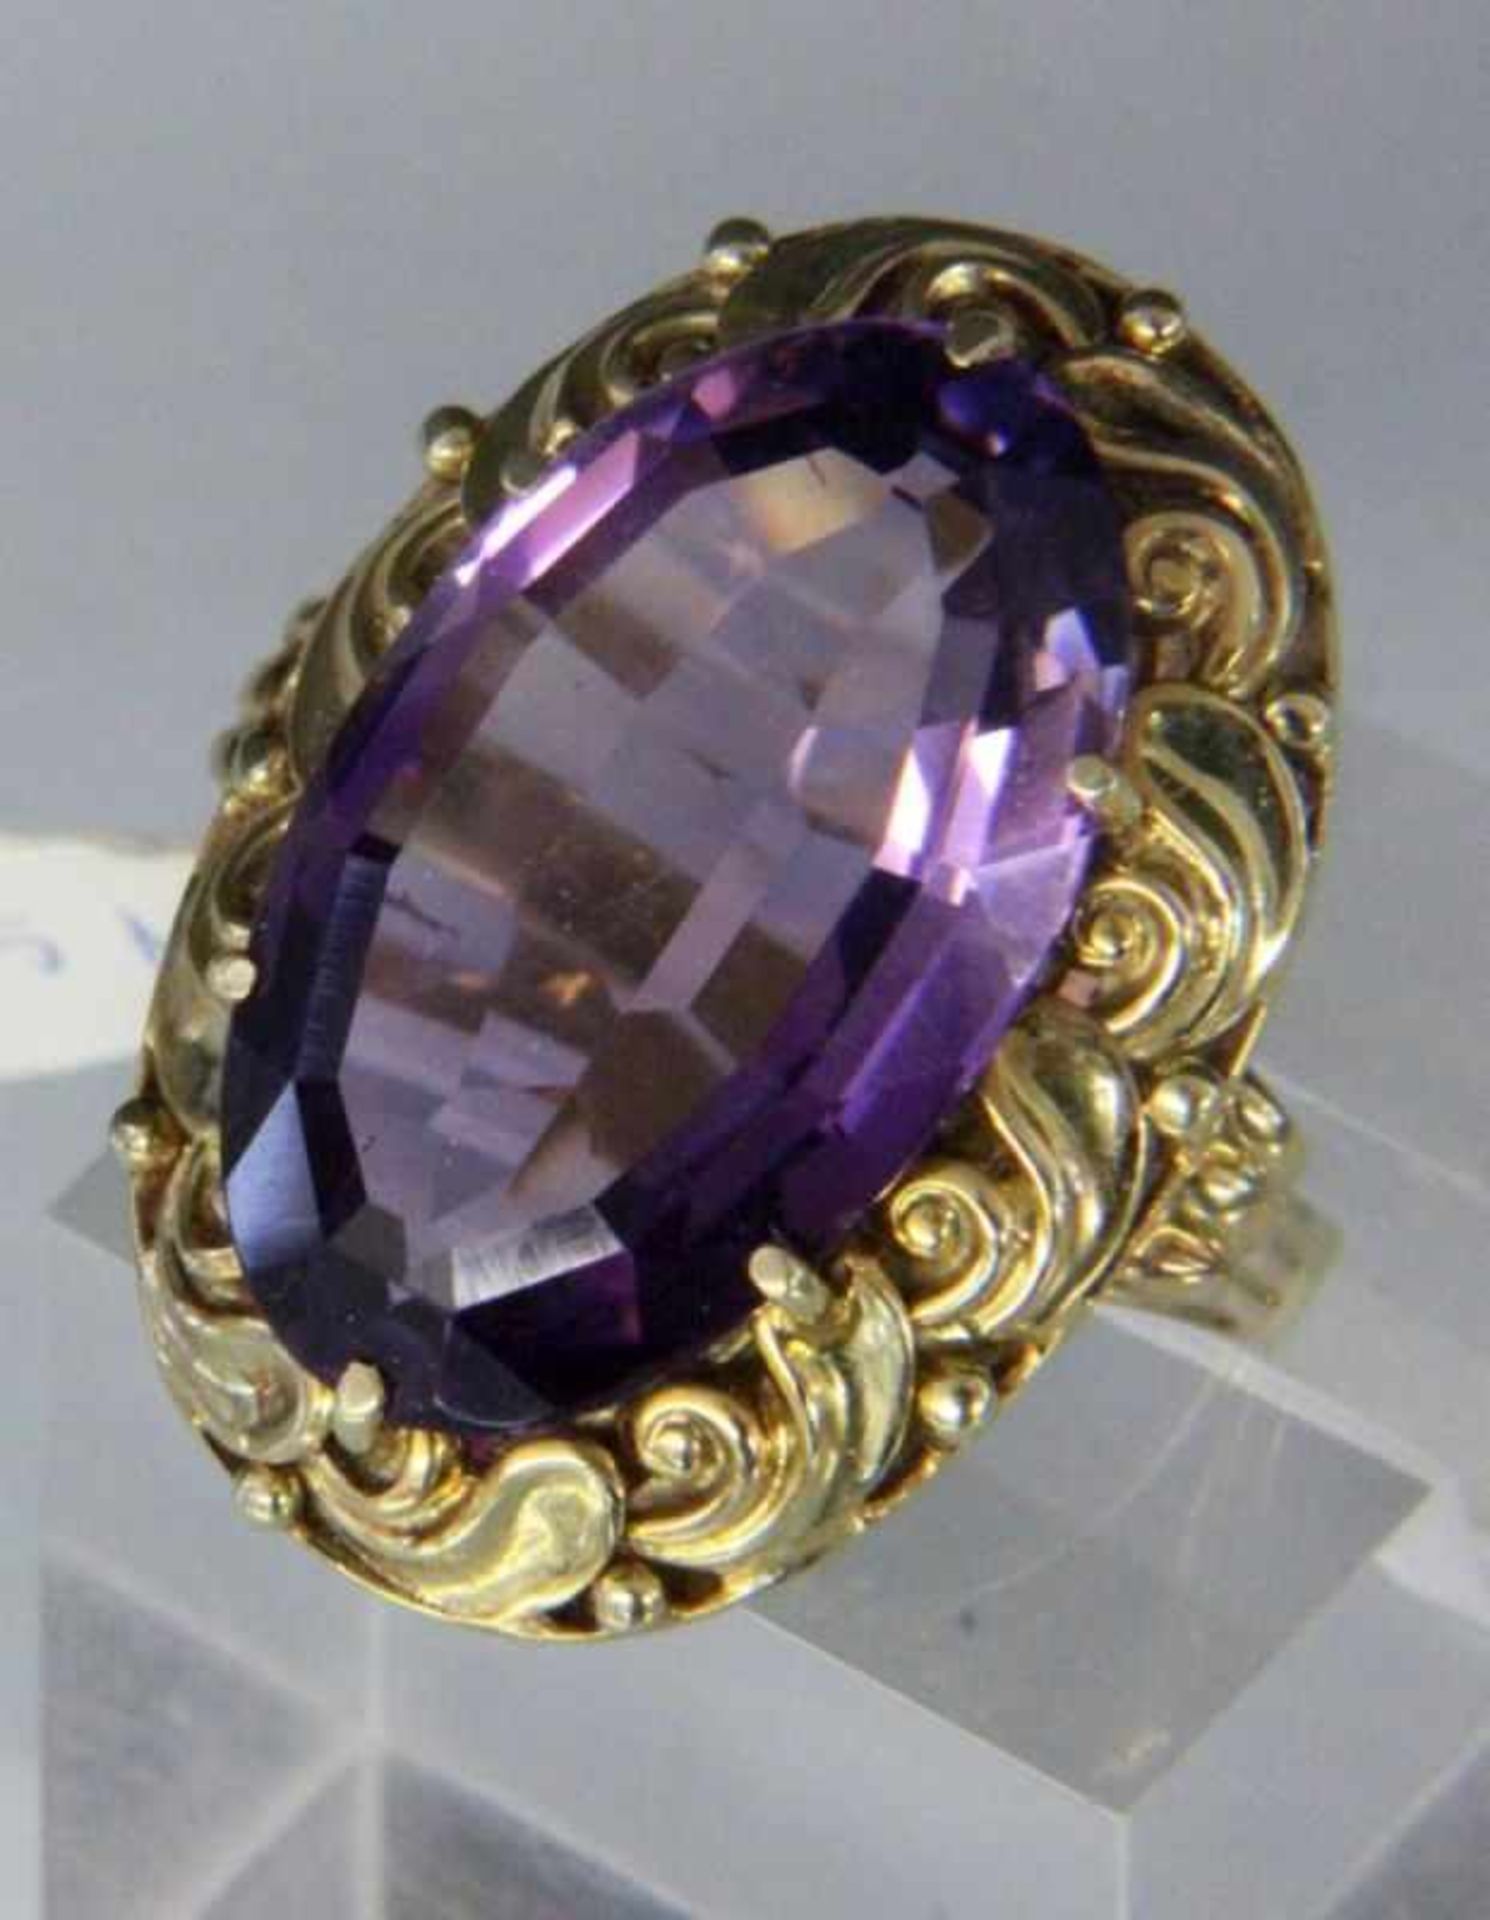 RING, 585/000 Gelbgold mit Amethyst. Brutto ca. 10,6g A RING, 585/000 yellow gold set with amethyst